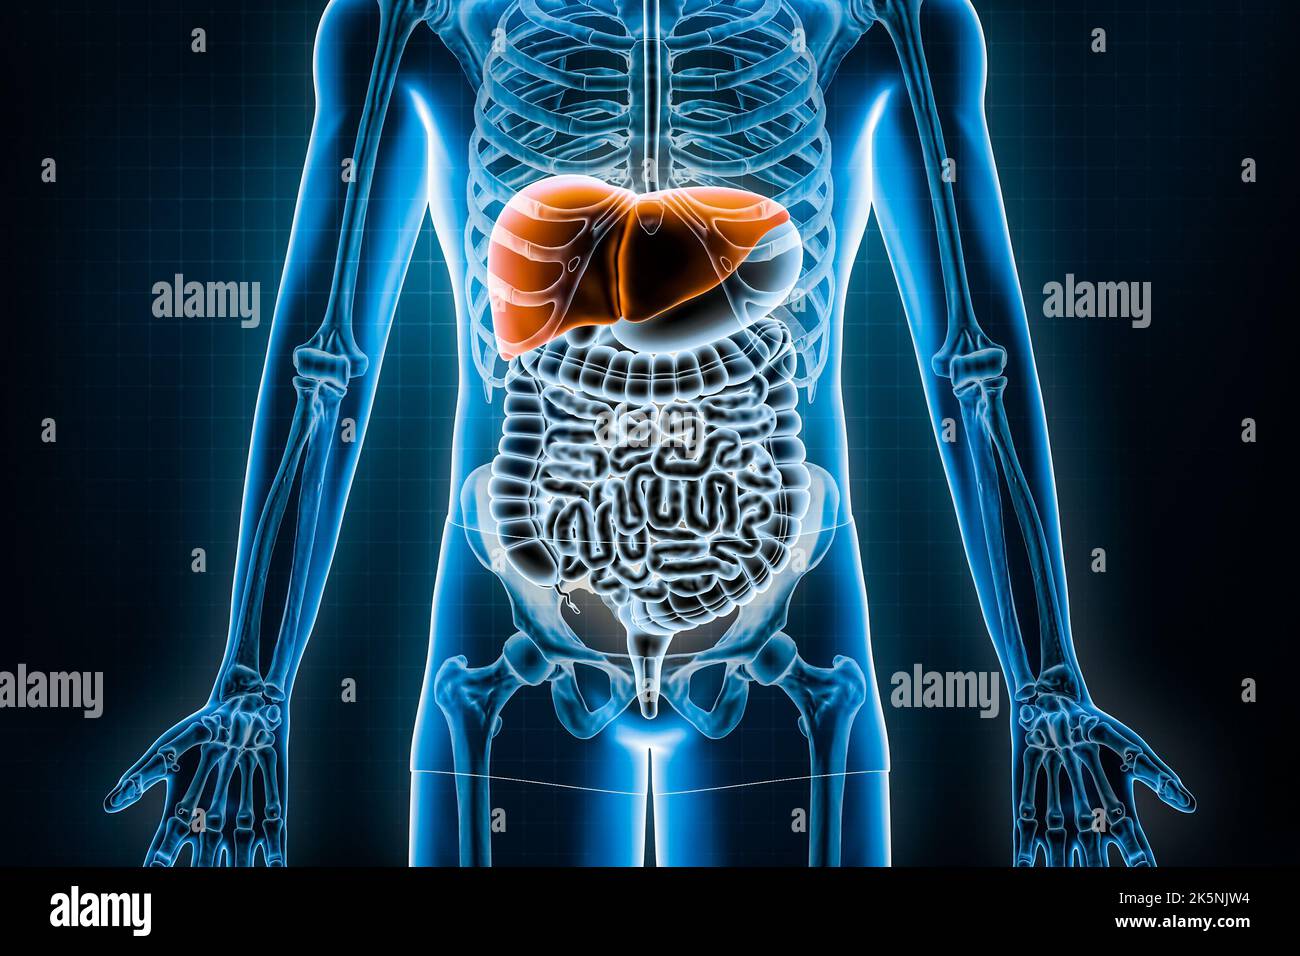 Liver 3D rendering illustration. Anterior or front view of the human digestive system and gastrointestinal tract or bowels. Anatomy, medical, biology, Stock Photo